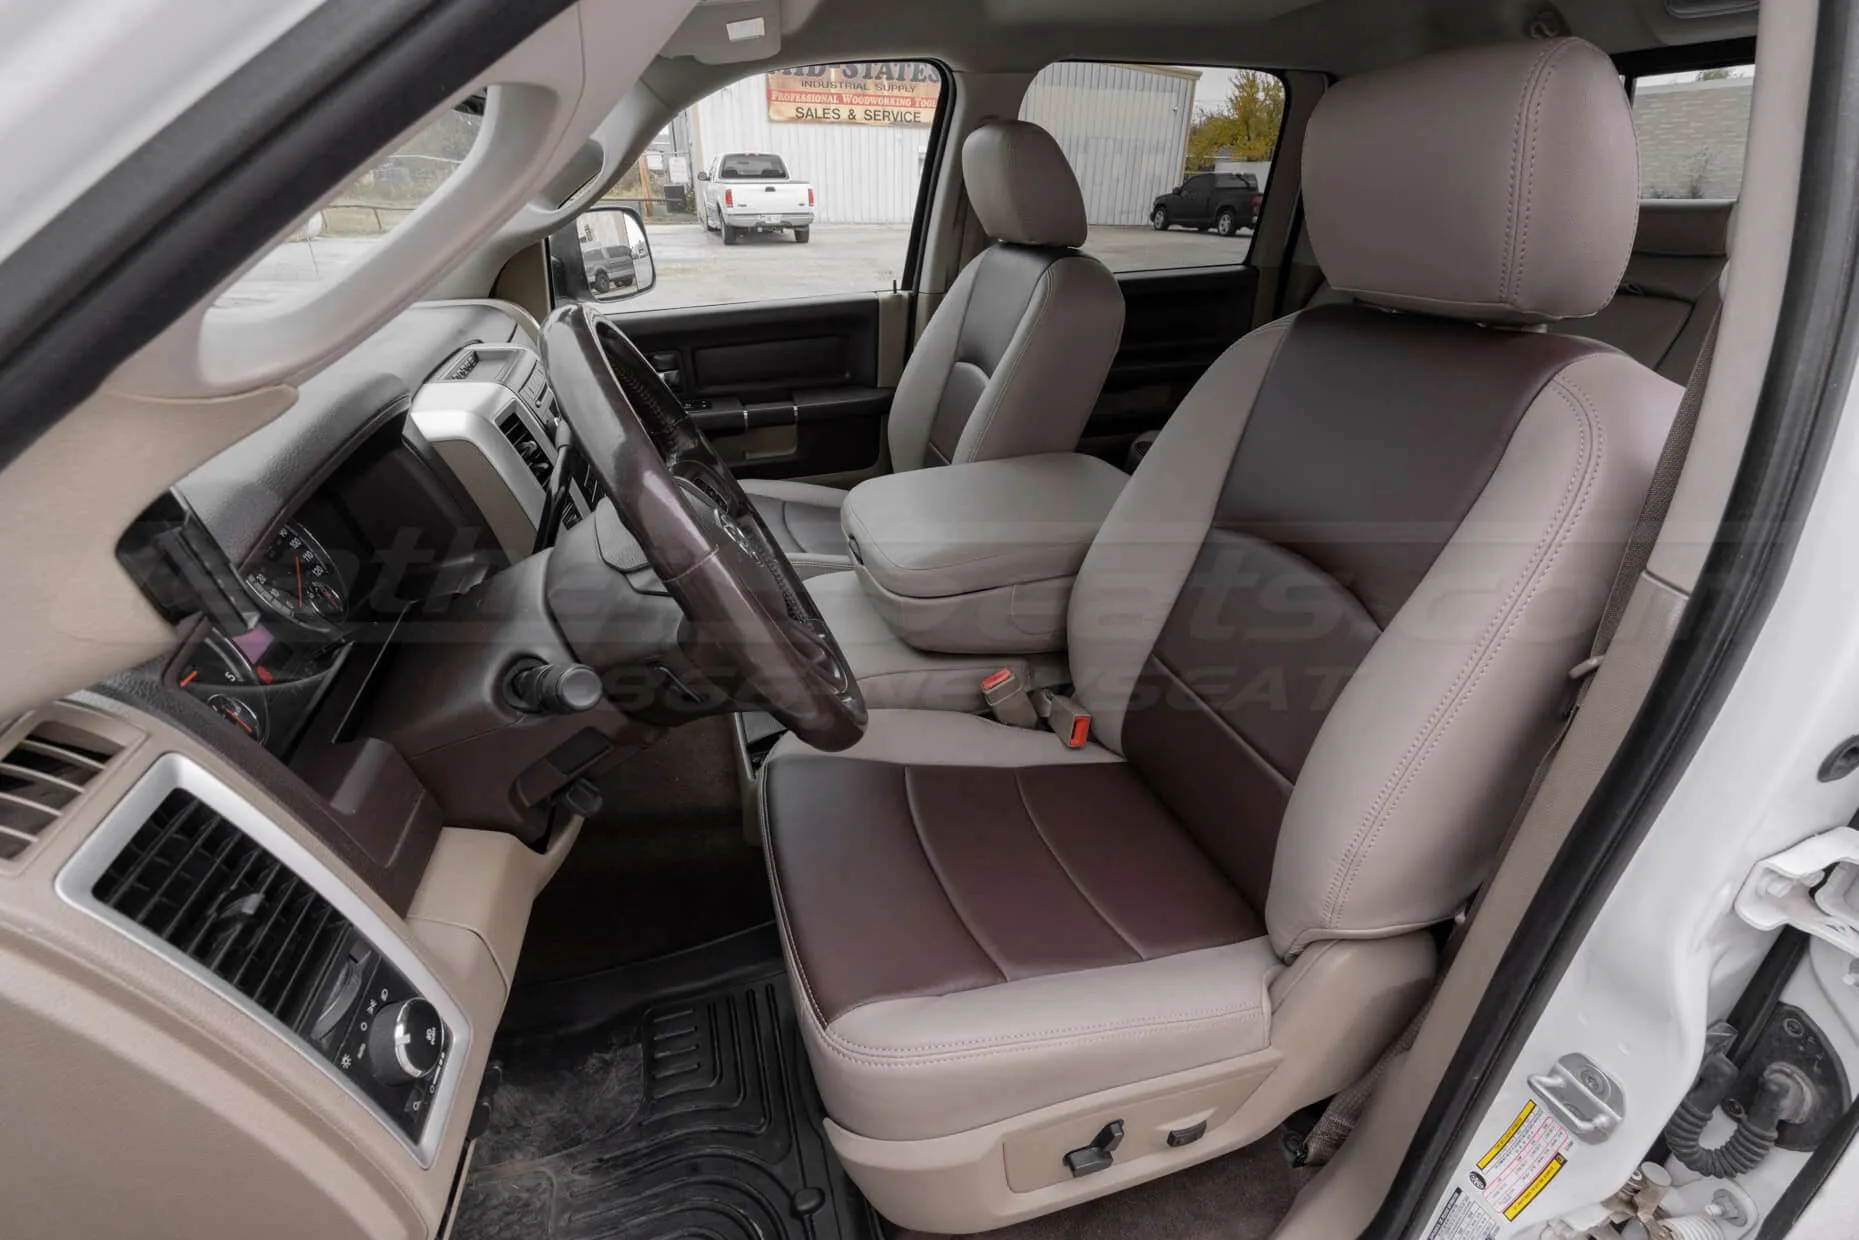 2011-2012 Dodge rRam Crew Cab with custom Fawn and Coffee Leather Seats - Front driver seat